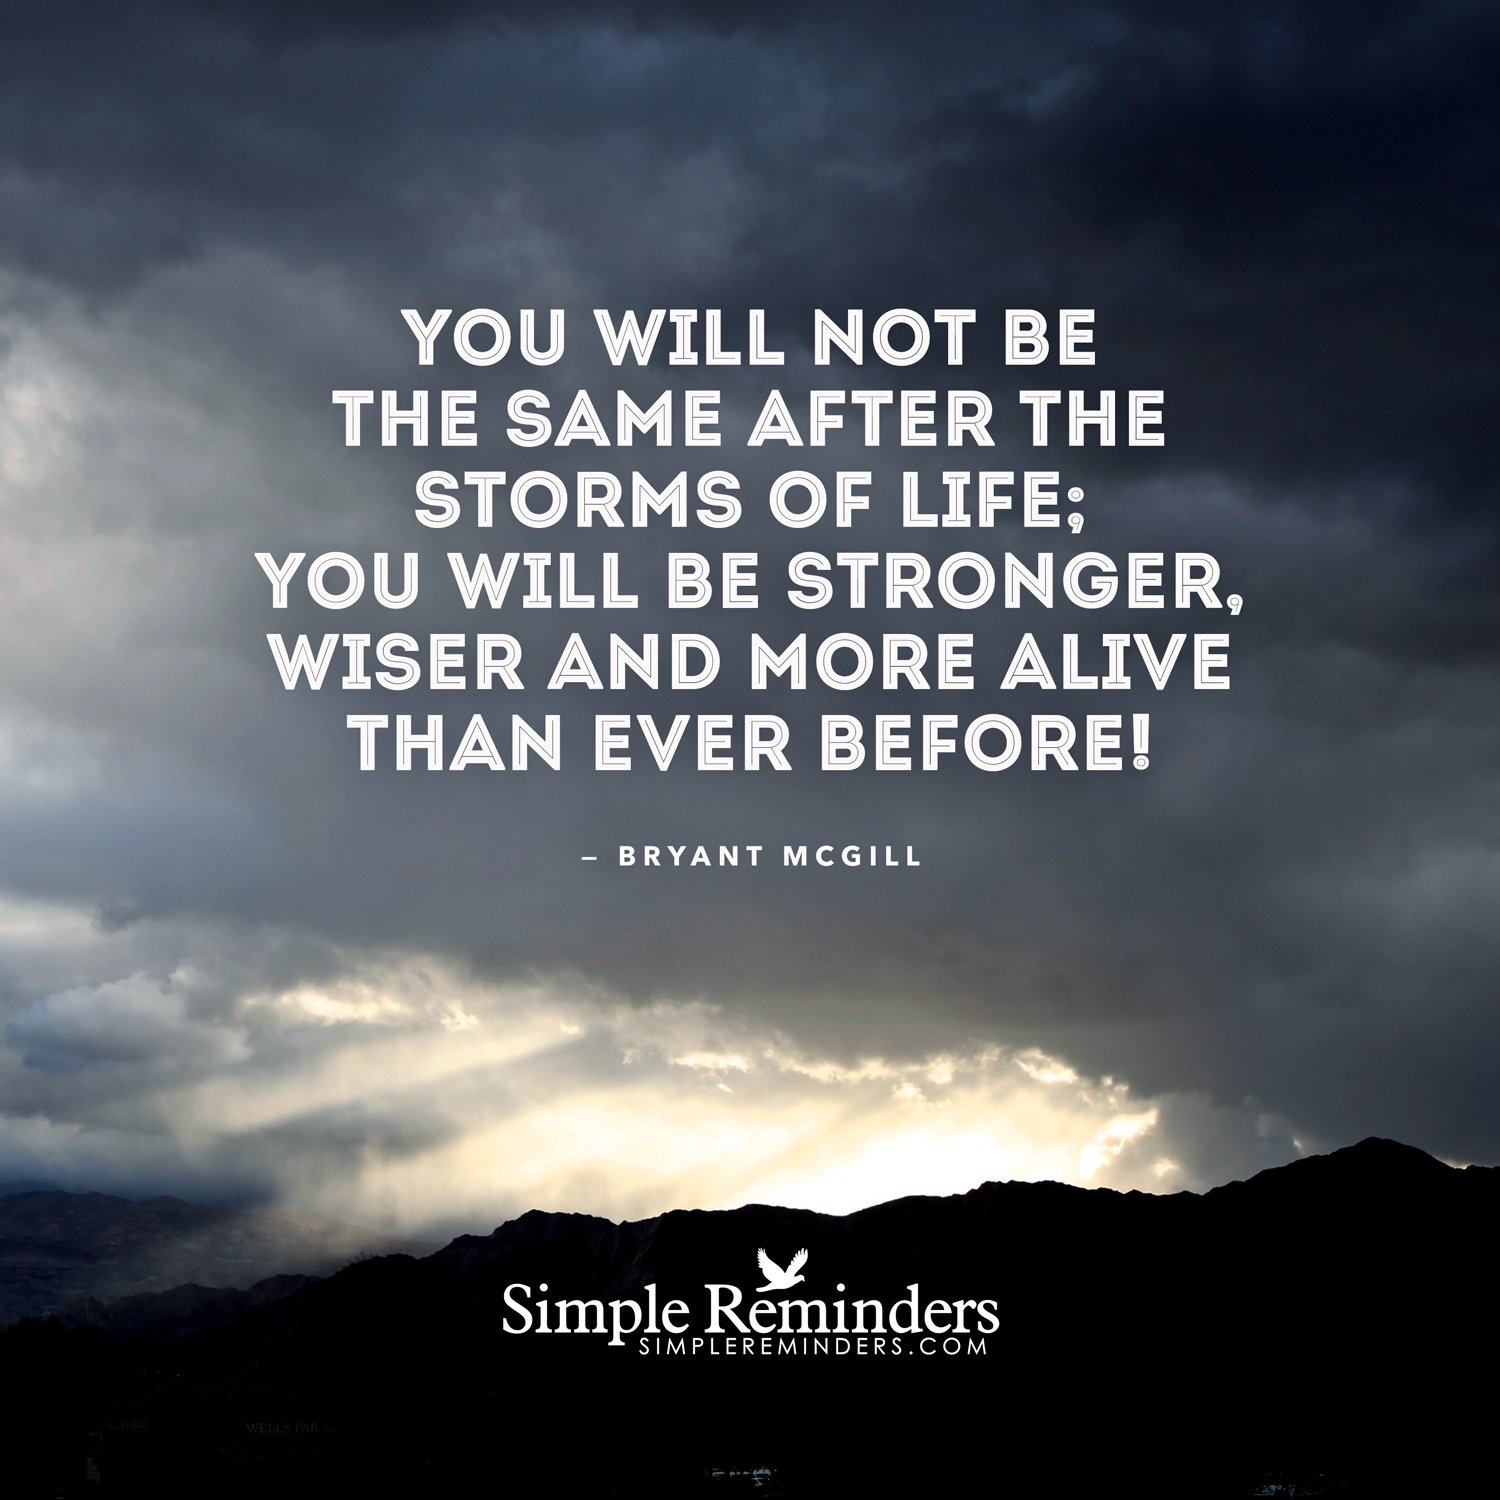 Quotes About Facing Storms. QuotesGram